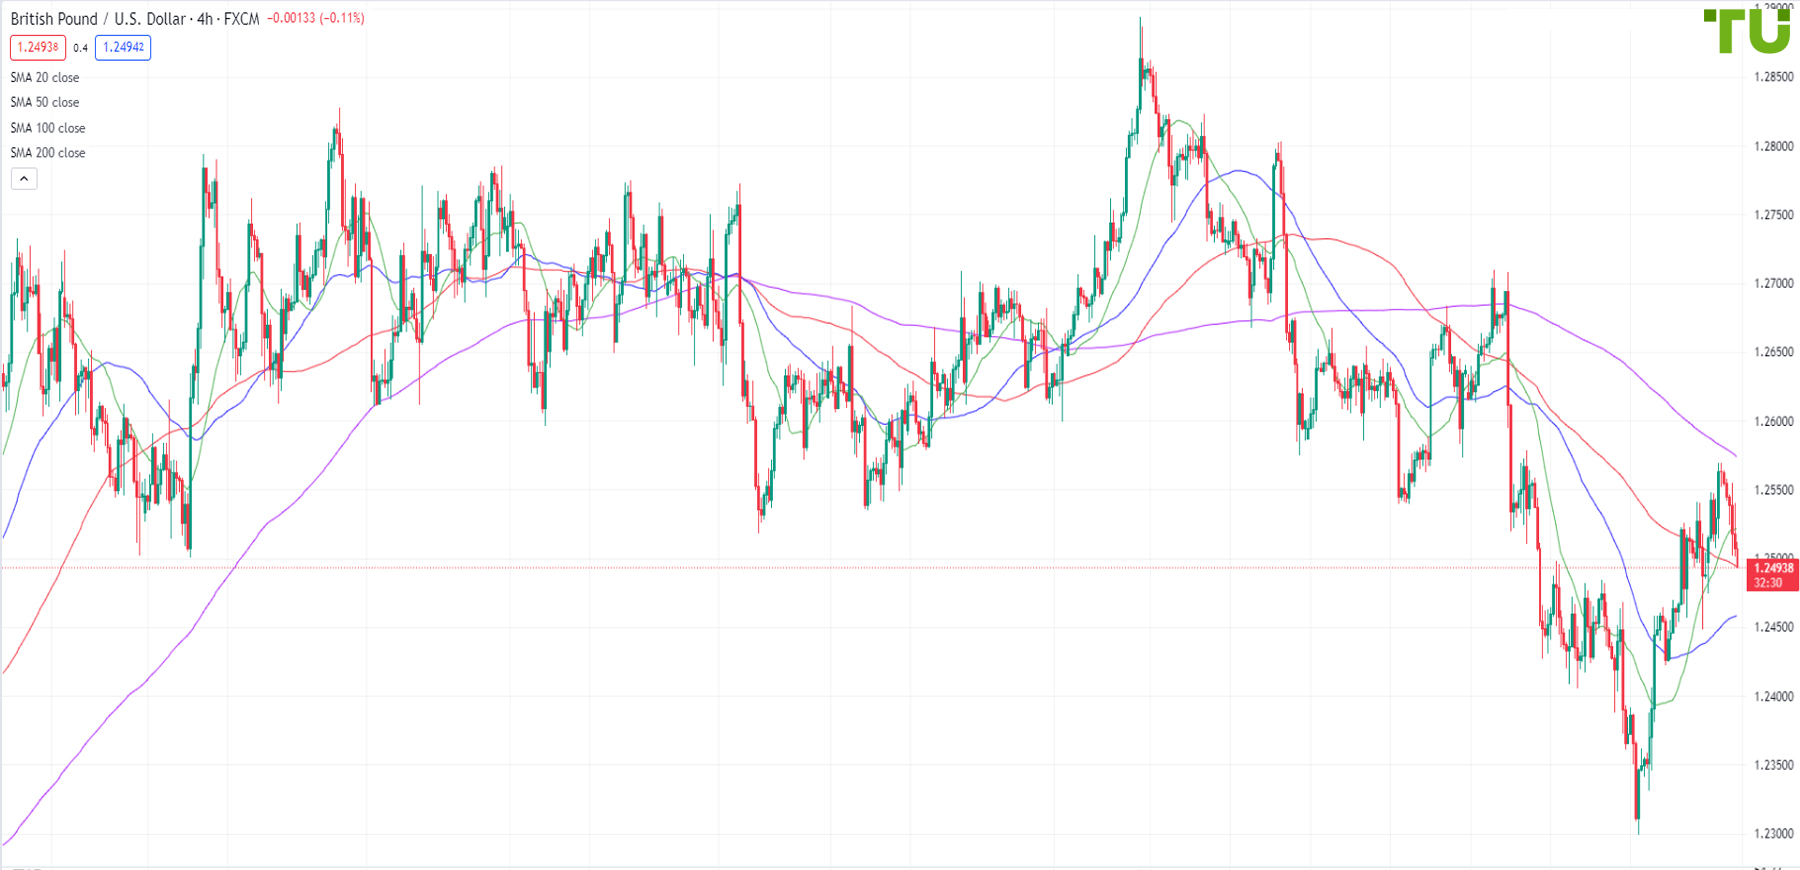 GBP/USD is also sold on the rise